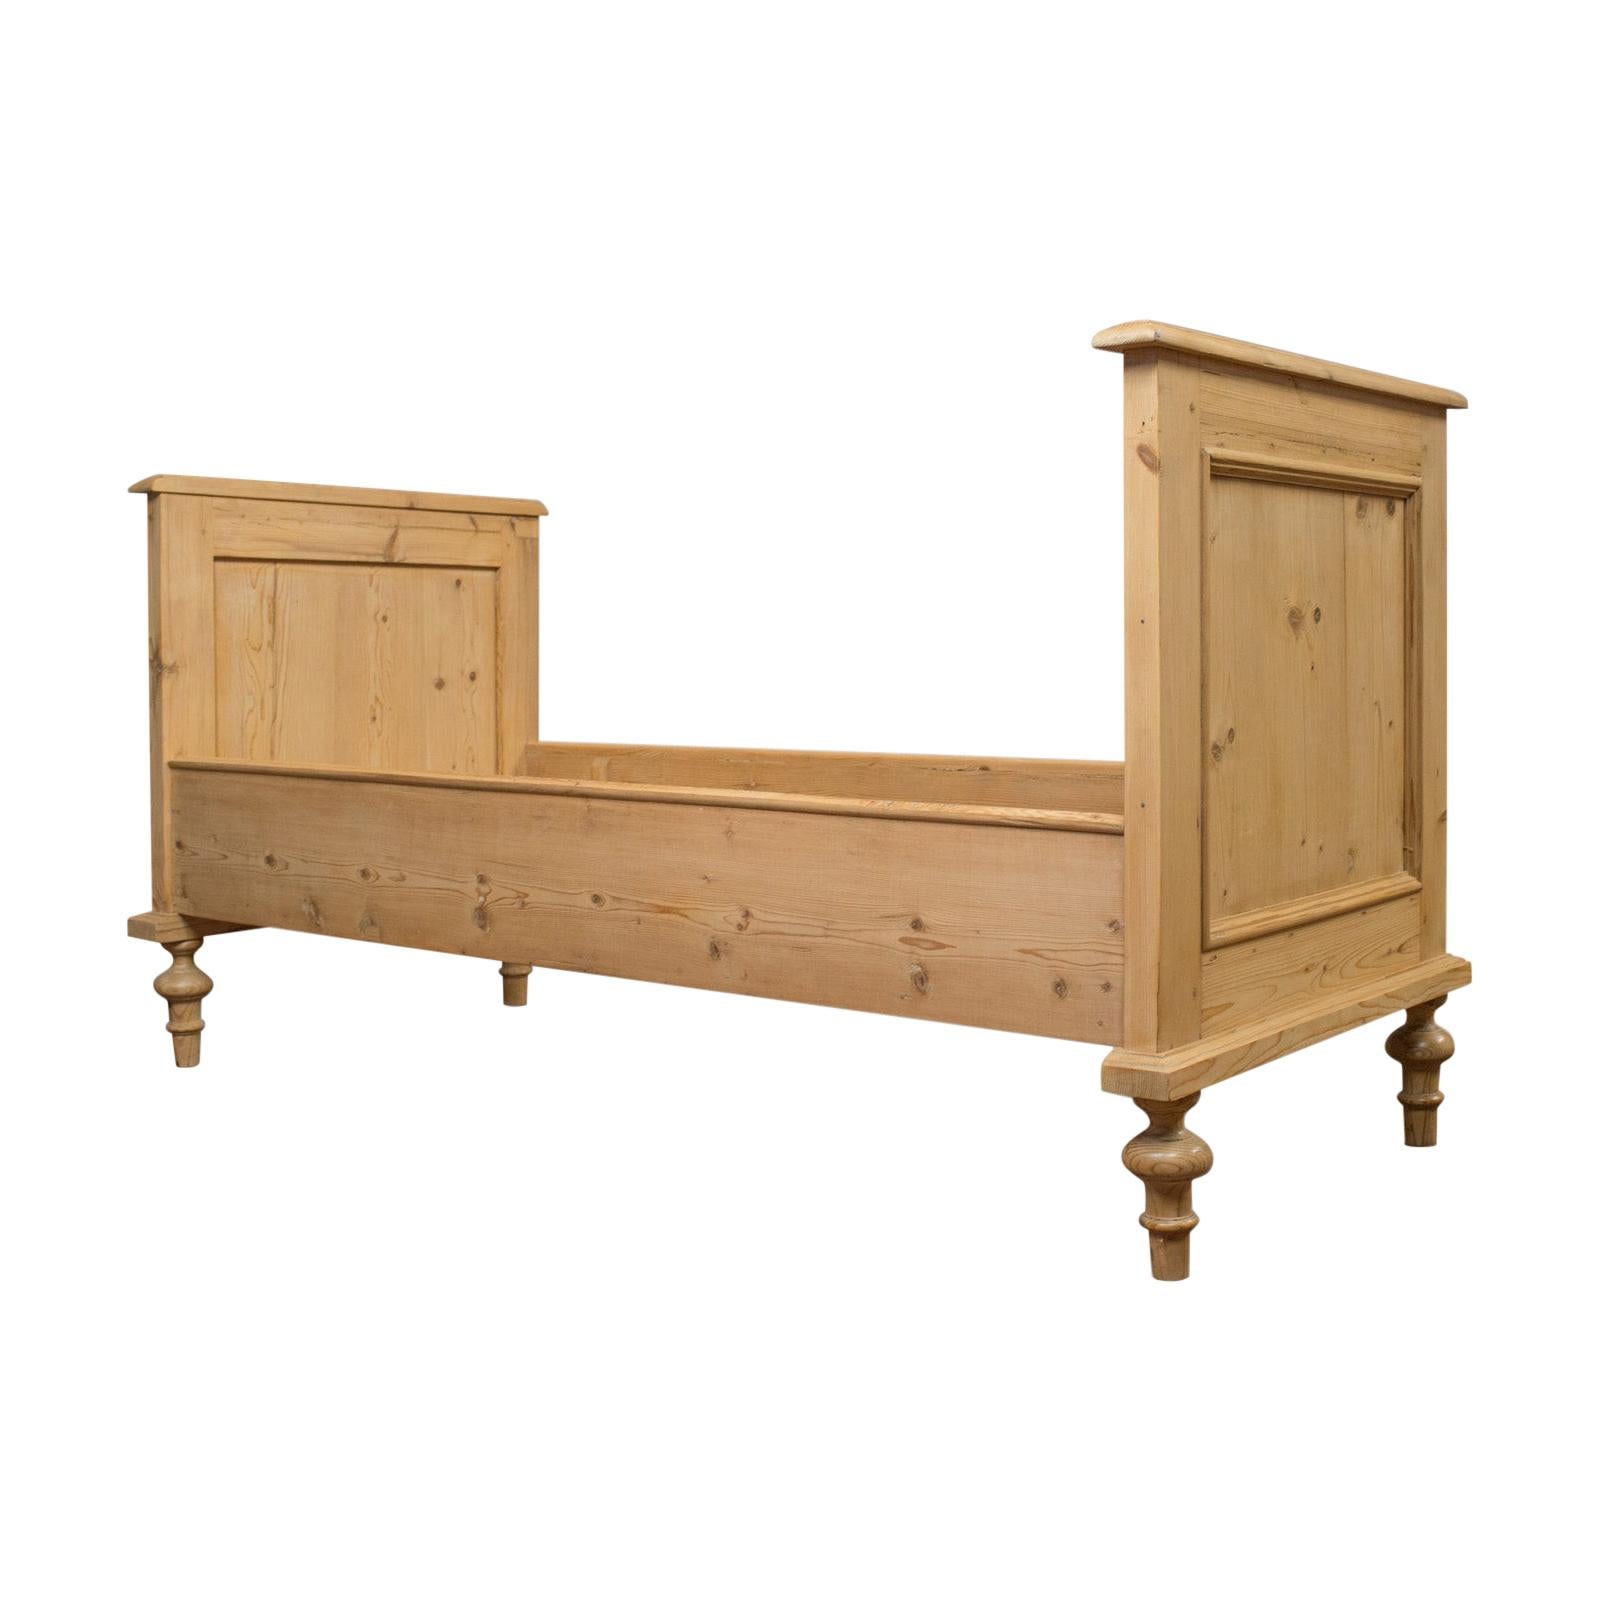 Bed Frame, English, Victorian, Pine, Bedstead, Late 19th Century, circa 1900